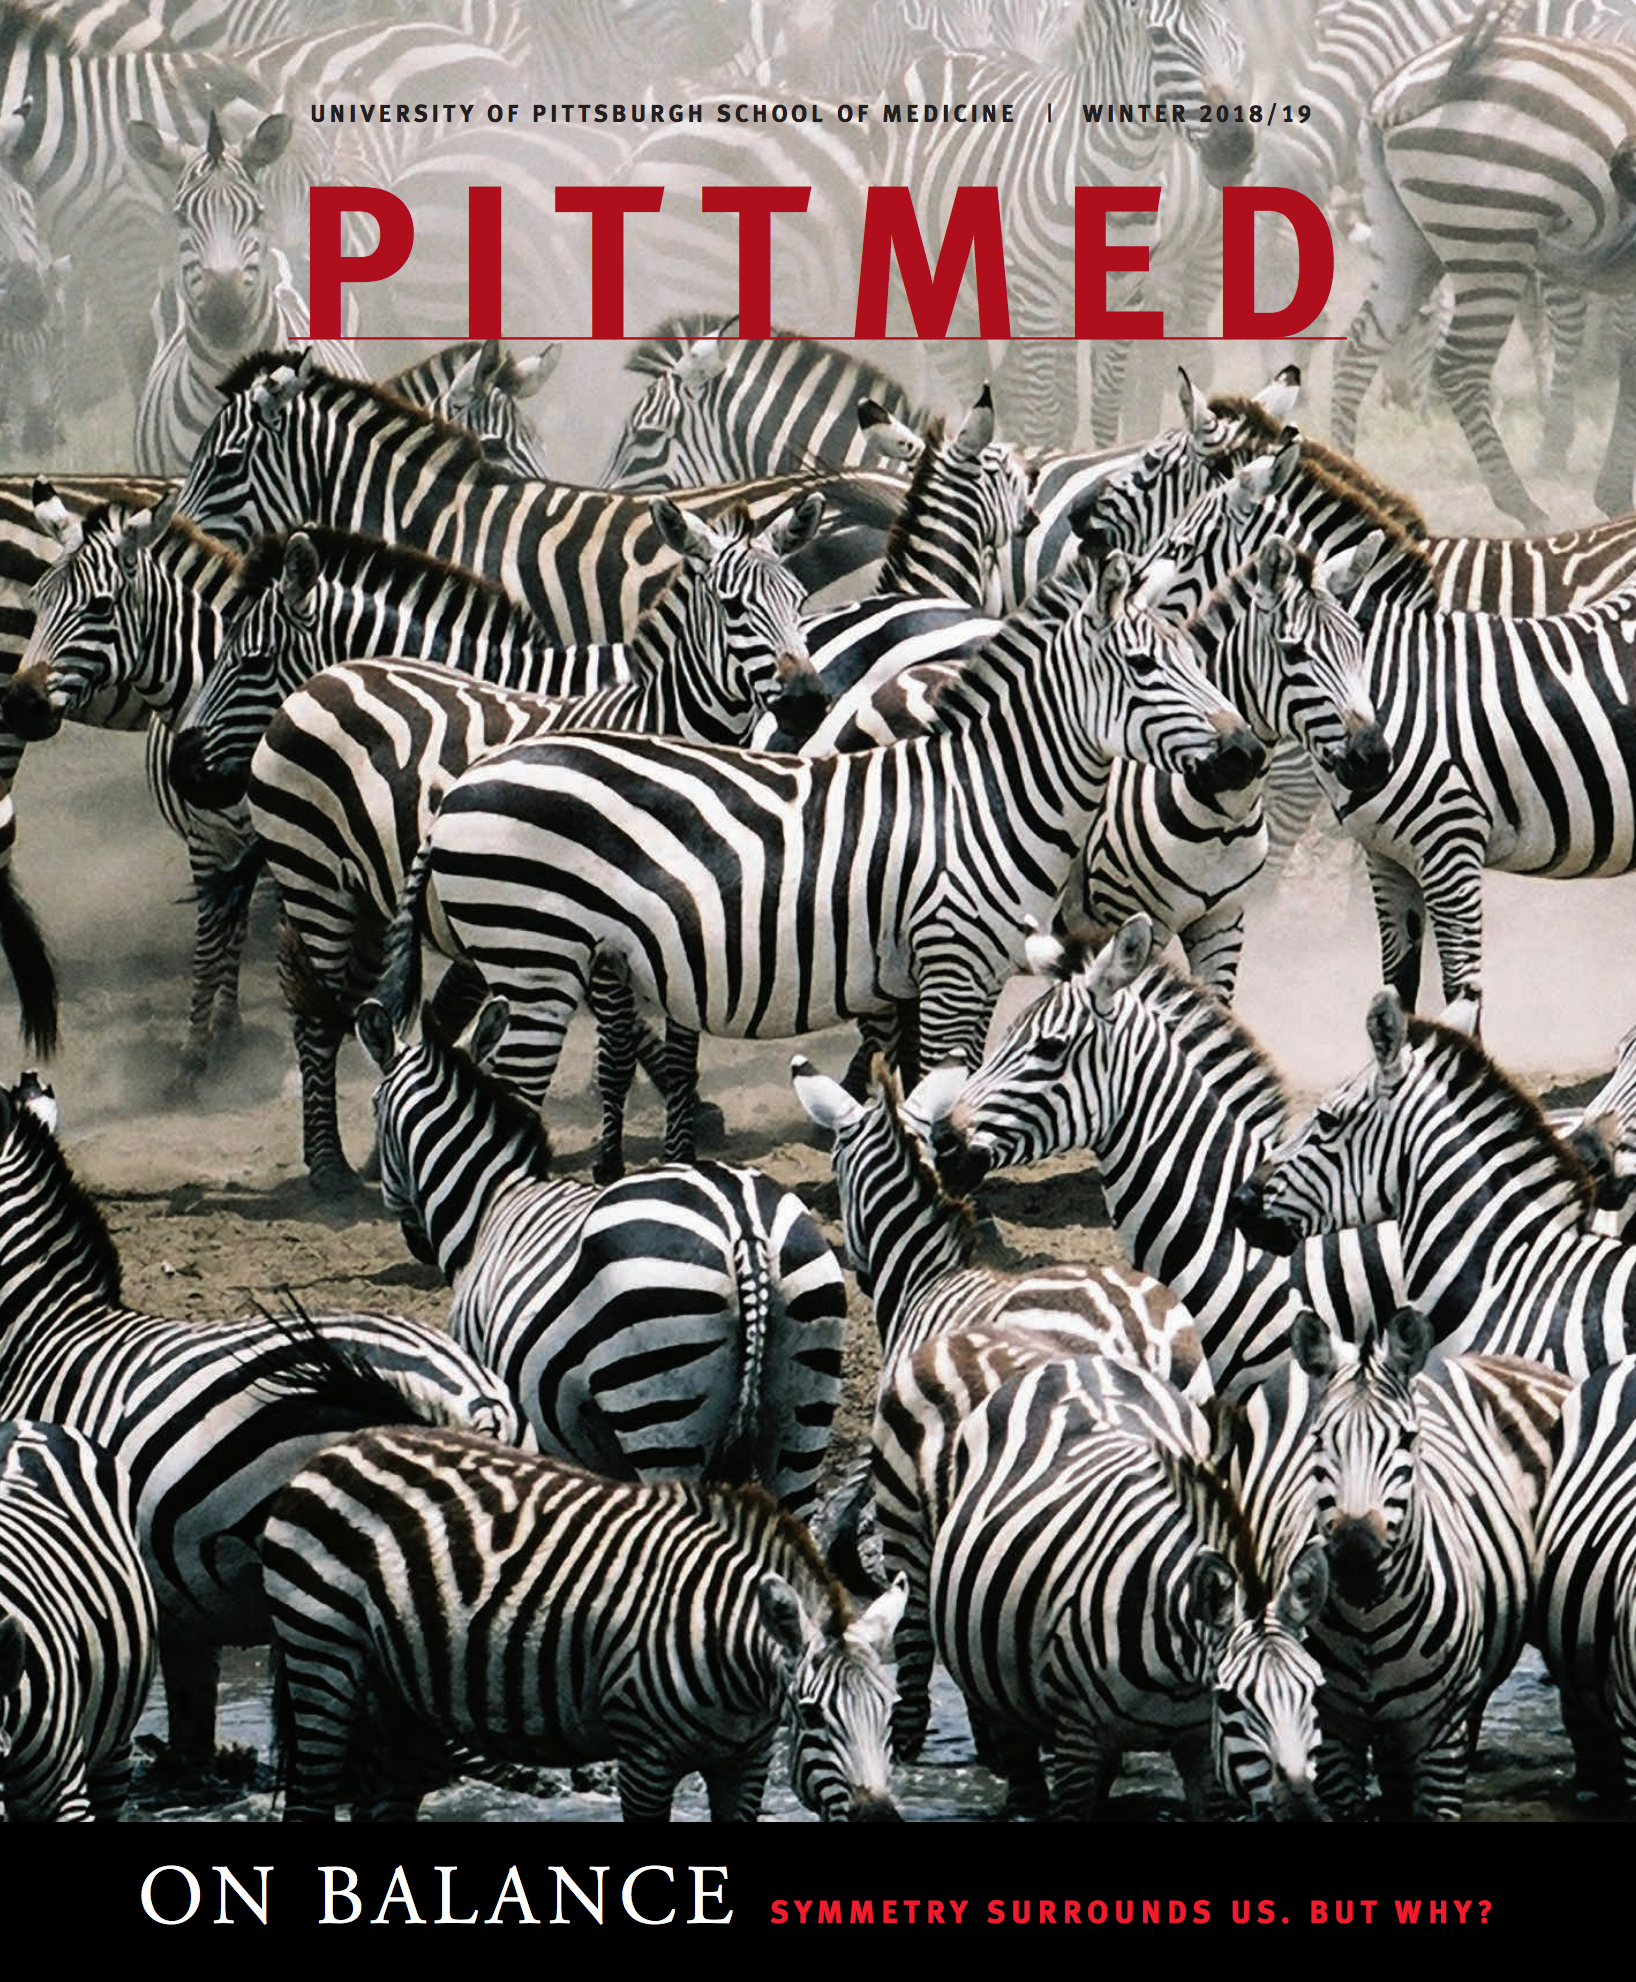 cover of the issue, which has zebras in a group